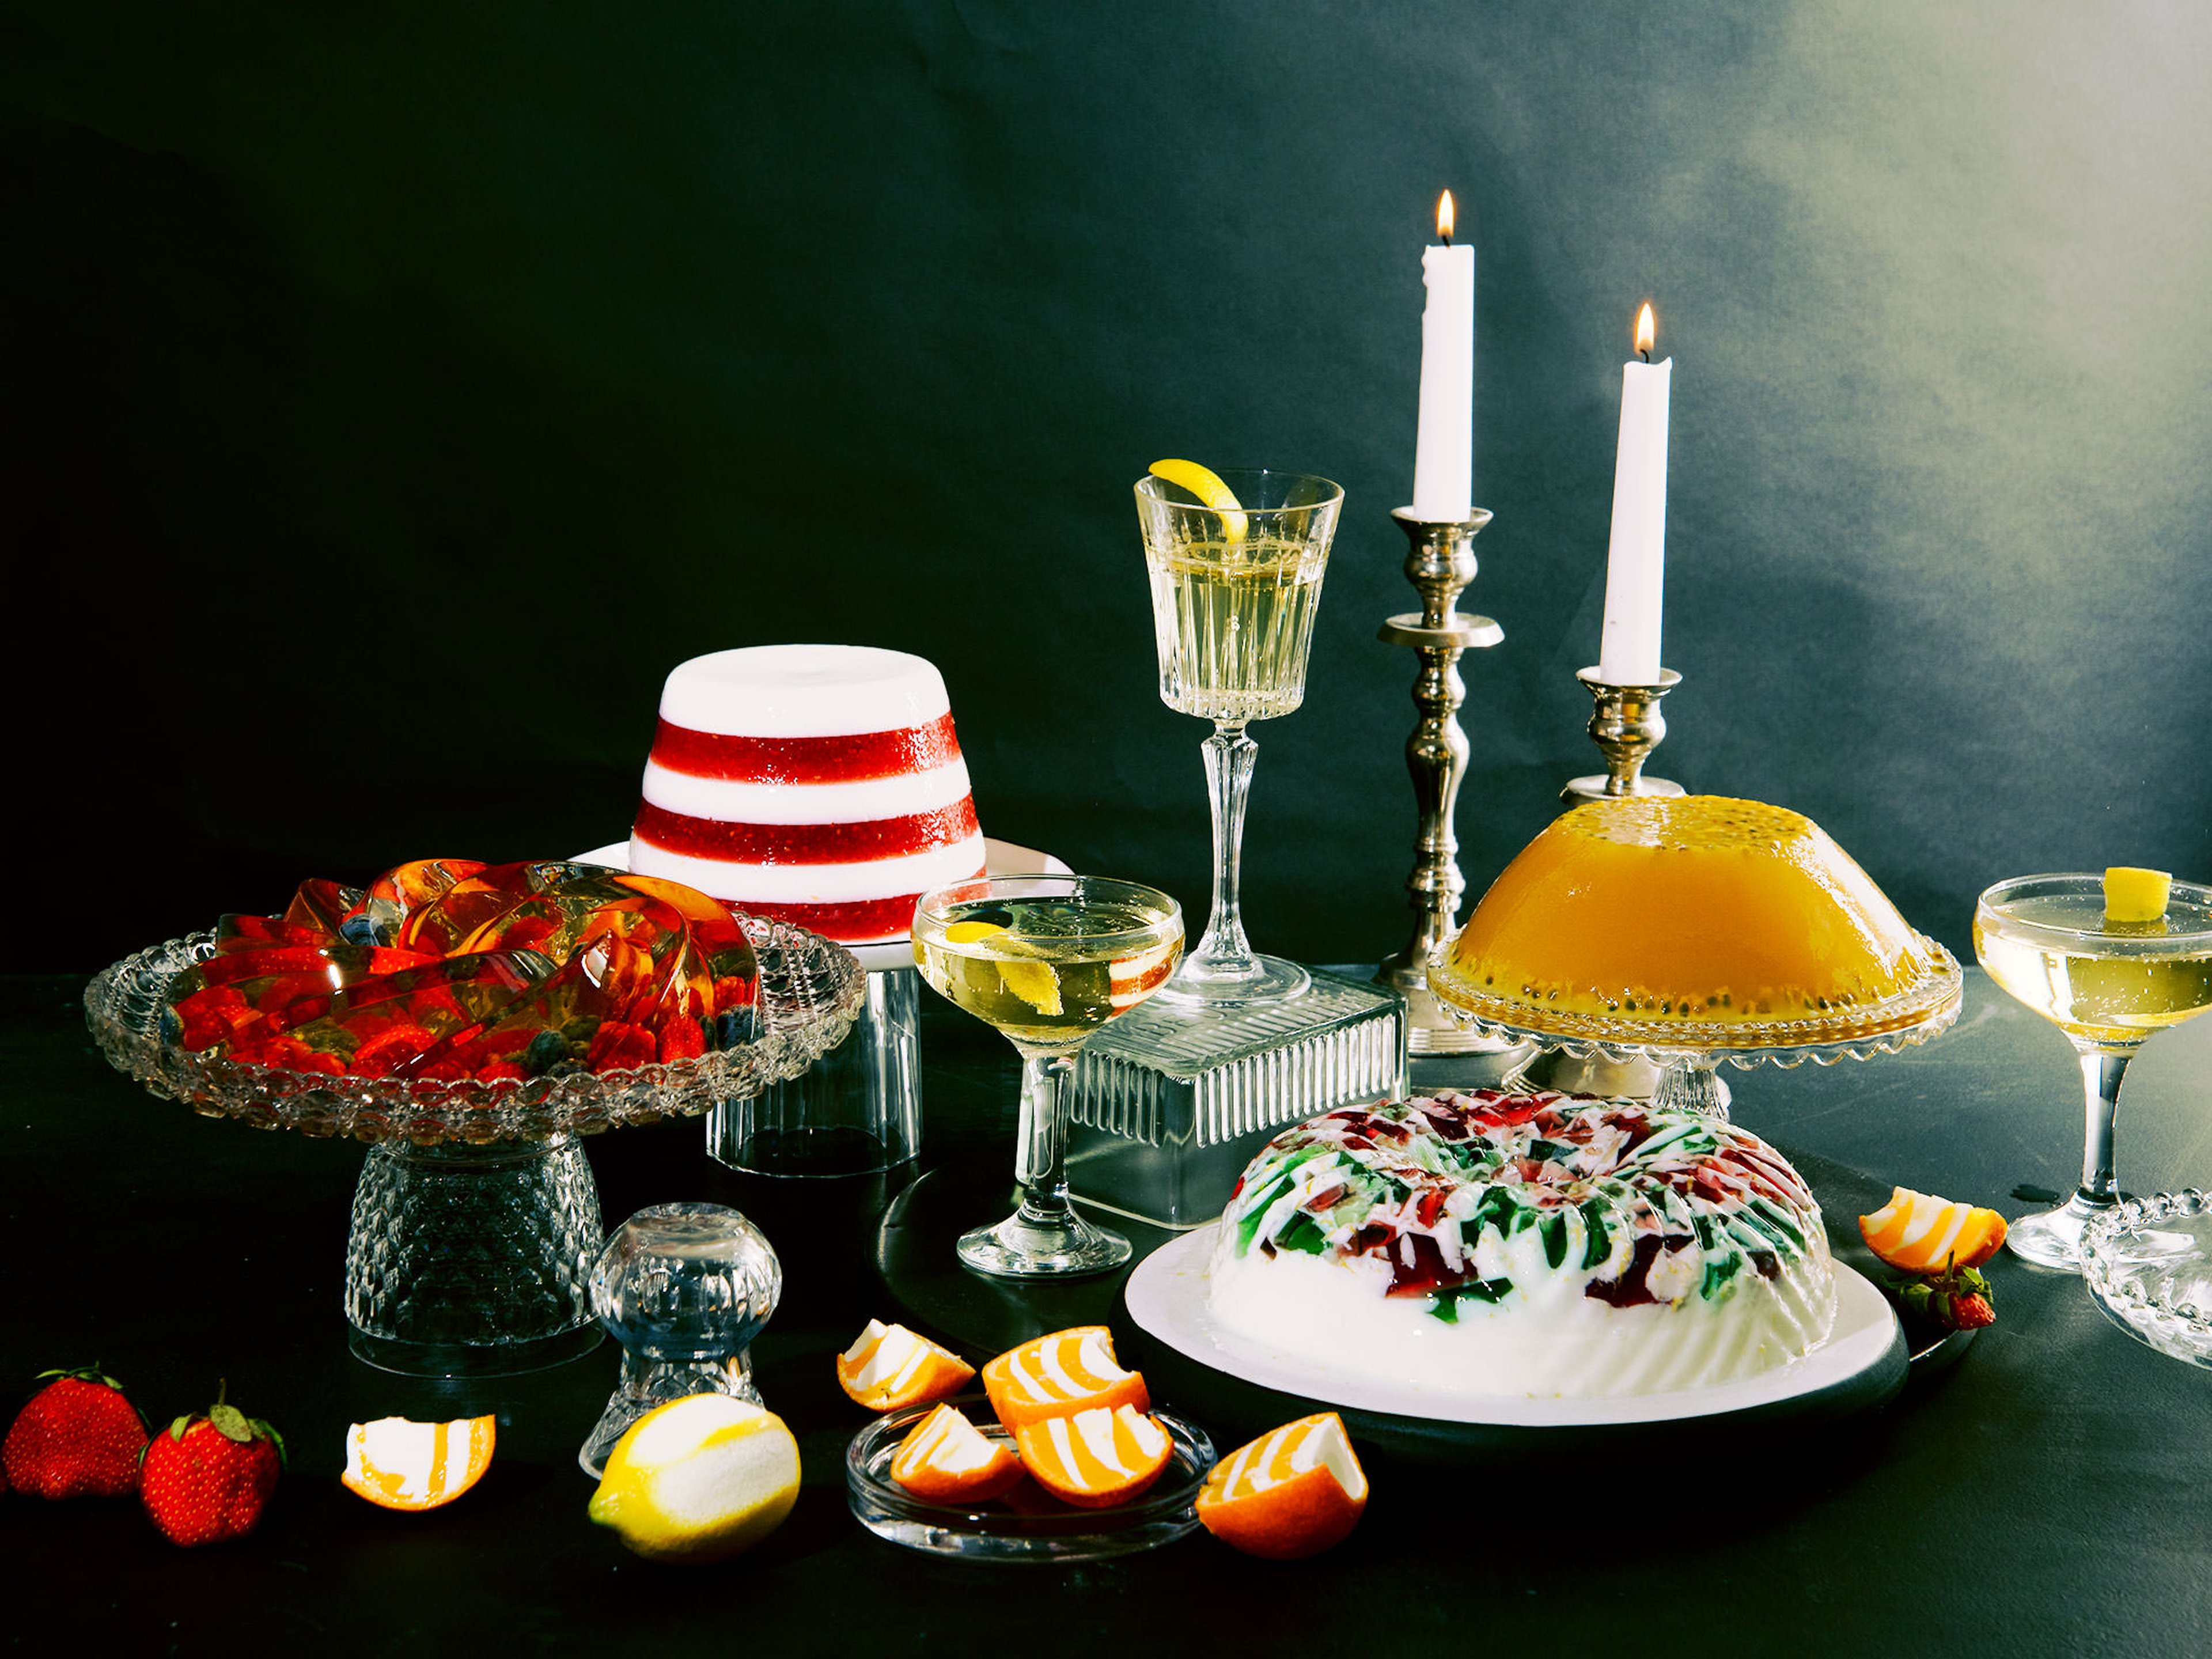 Go Retro This New Year's Eve with Jello Cocktails